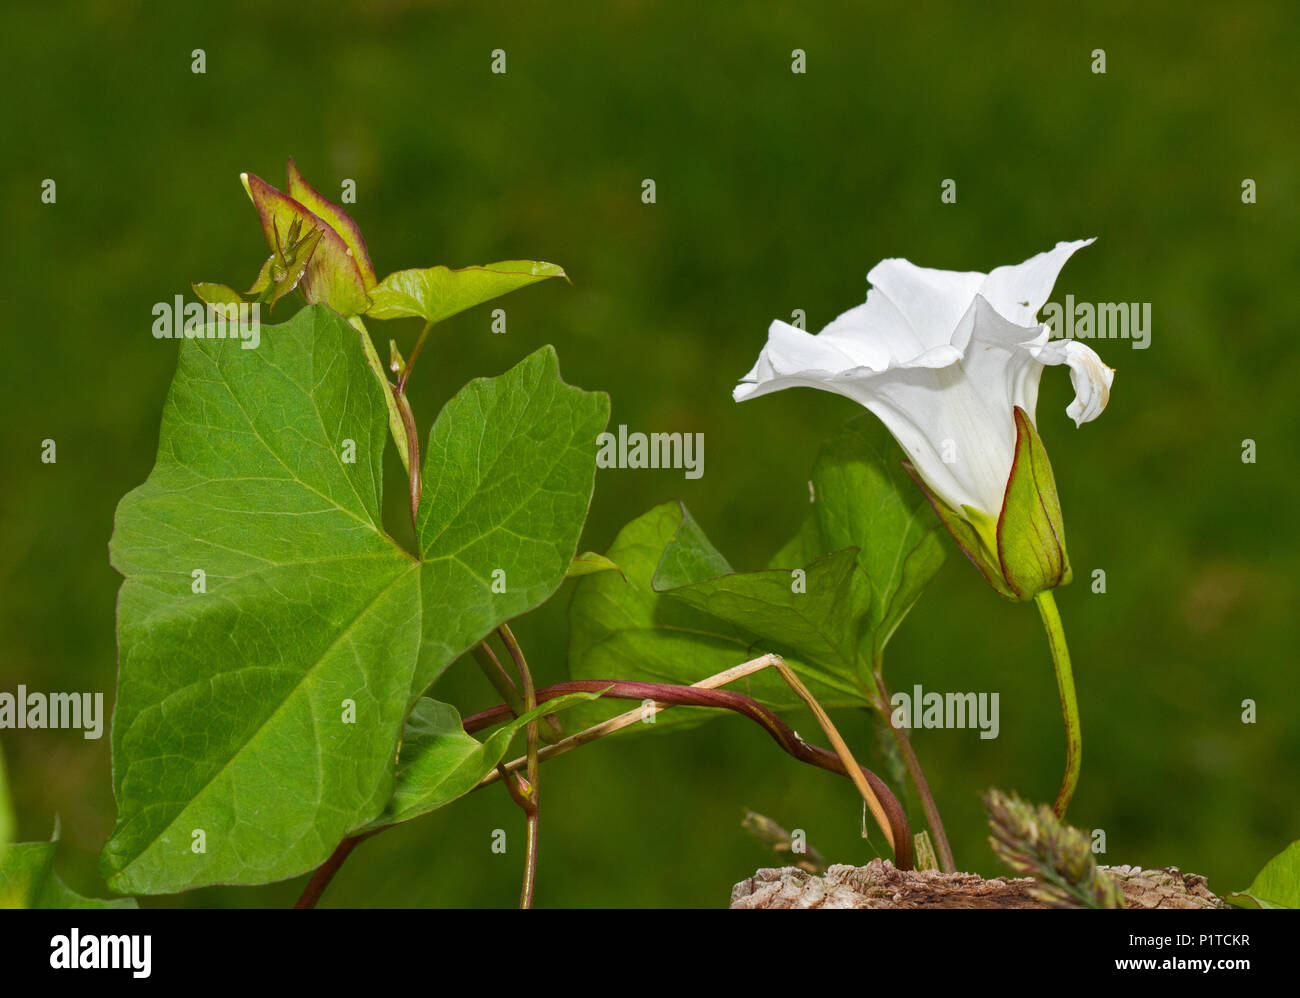 Flower, bud and leaves of Hedge bindweed, also known as Rutland beauty Stock Photo